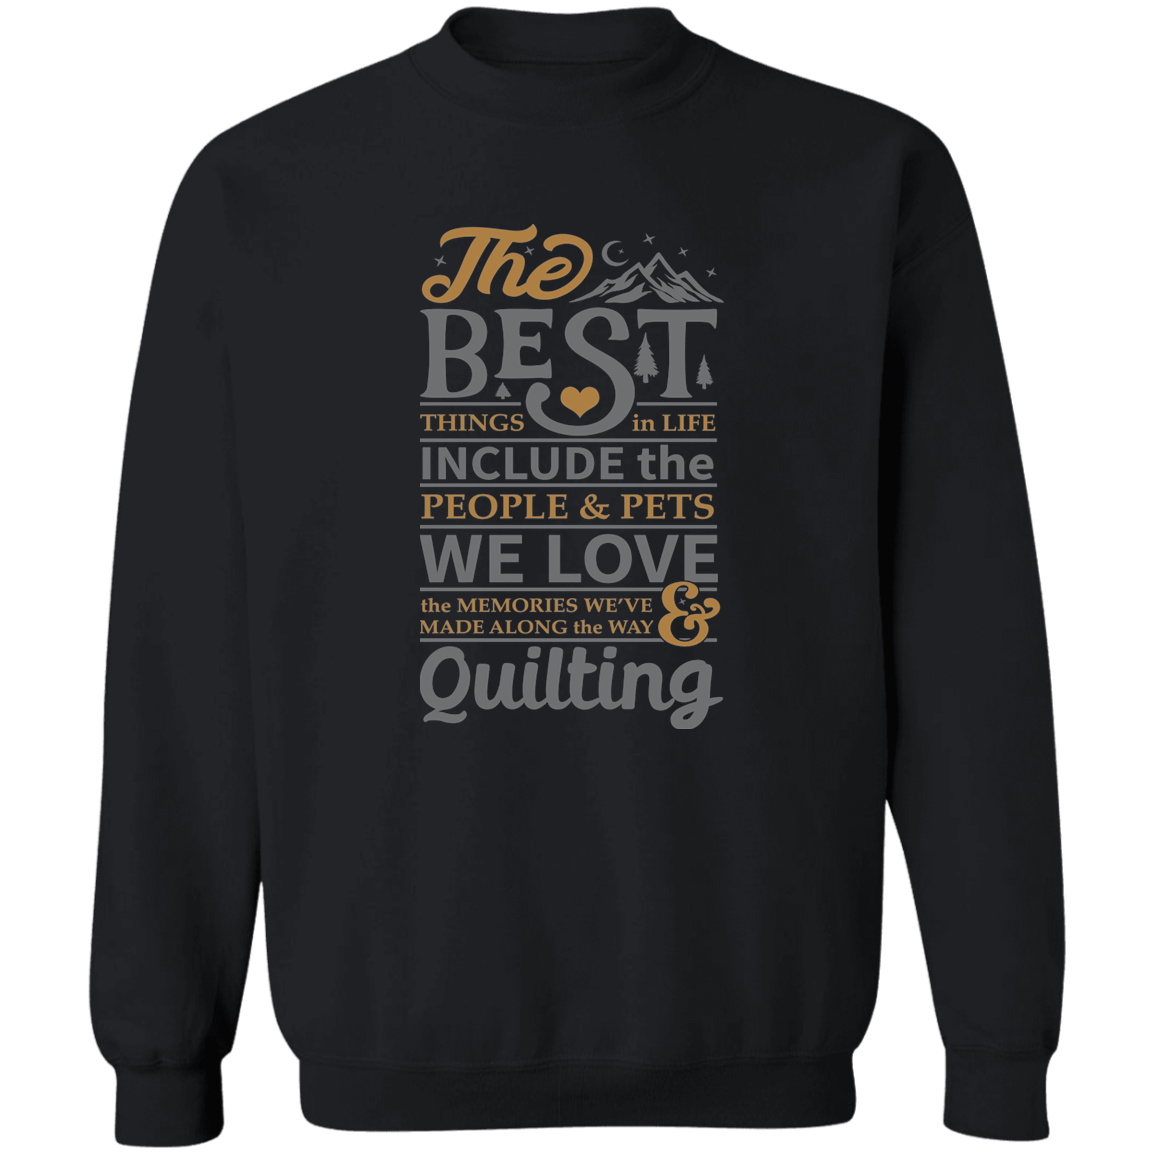 The best things in life - QUILTING Pullover Sweatshirt